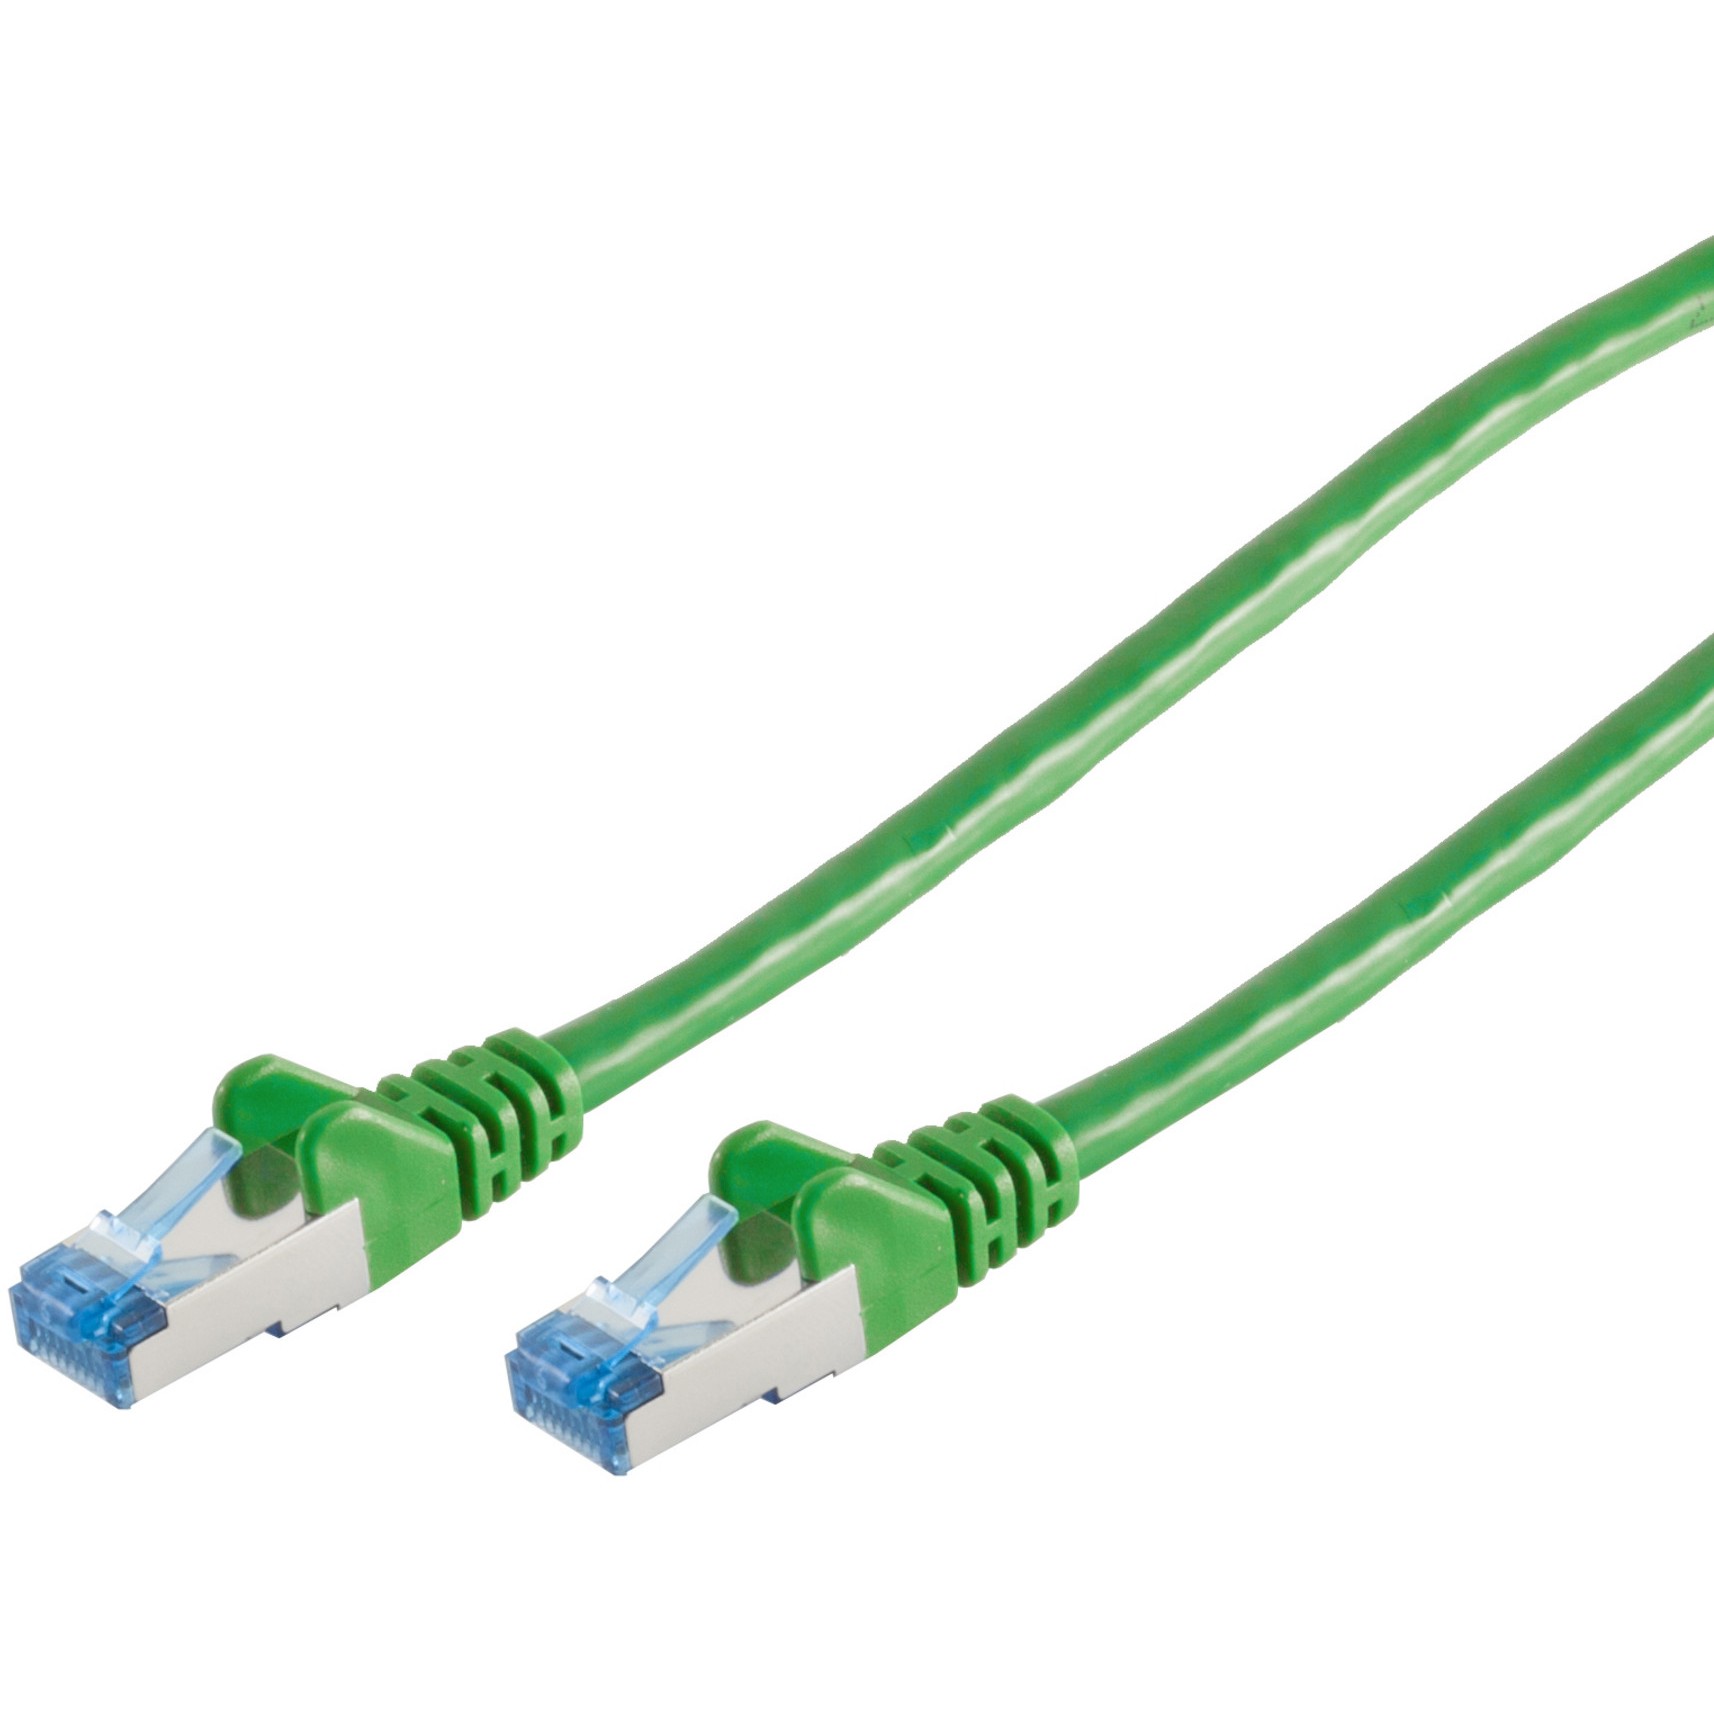 S-Conn 75711-G networking cable - 75711-G